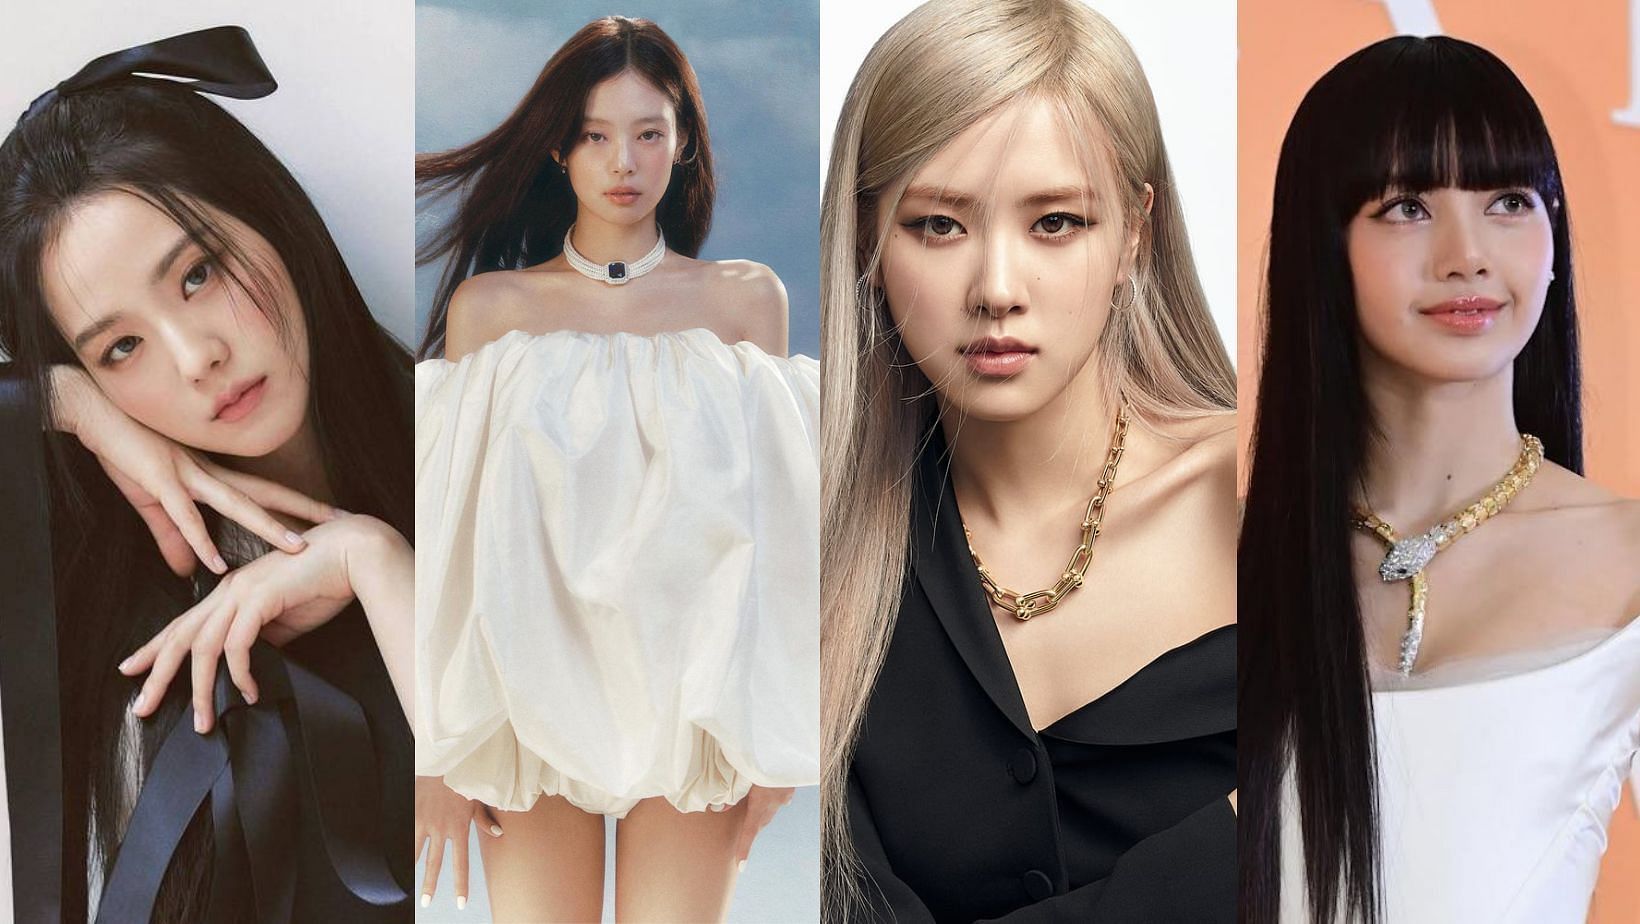 Featuring BLACKPINK (L-R) Jisoo, Jennei, Ros&eacute;, and Lisa. (Images via Twitter/ @spinorbinmusic @seouIsonyosound and @pinksIover)